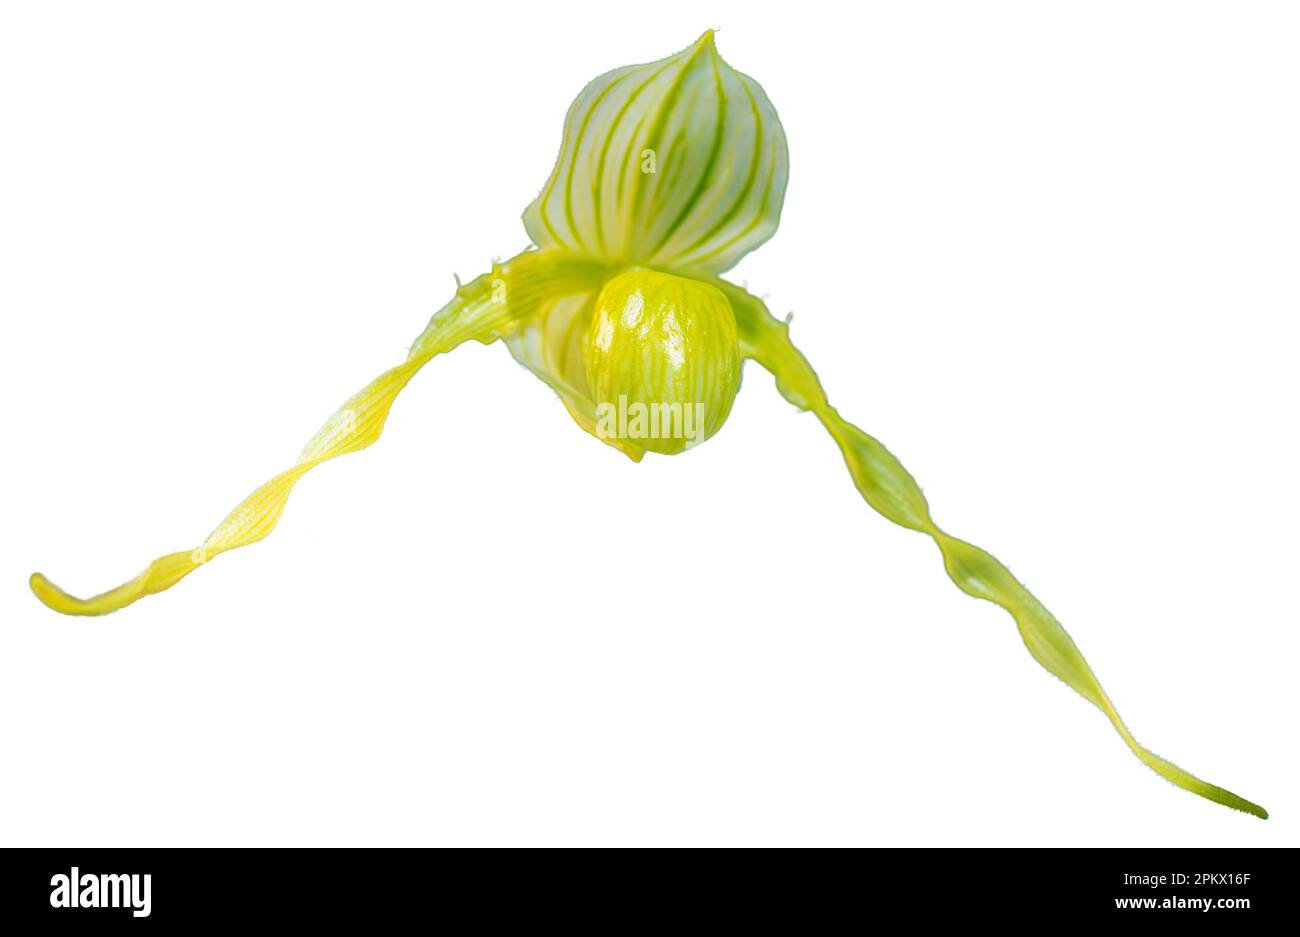 Flower colors are yellow, green and white. An orchid of the genus Paphiopedilum. Close-up of isolated beautiful plant. Stock Photo